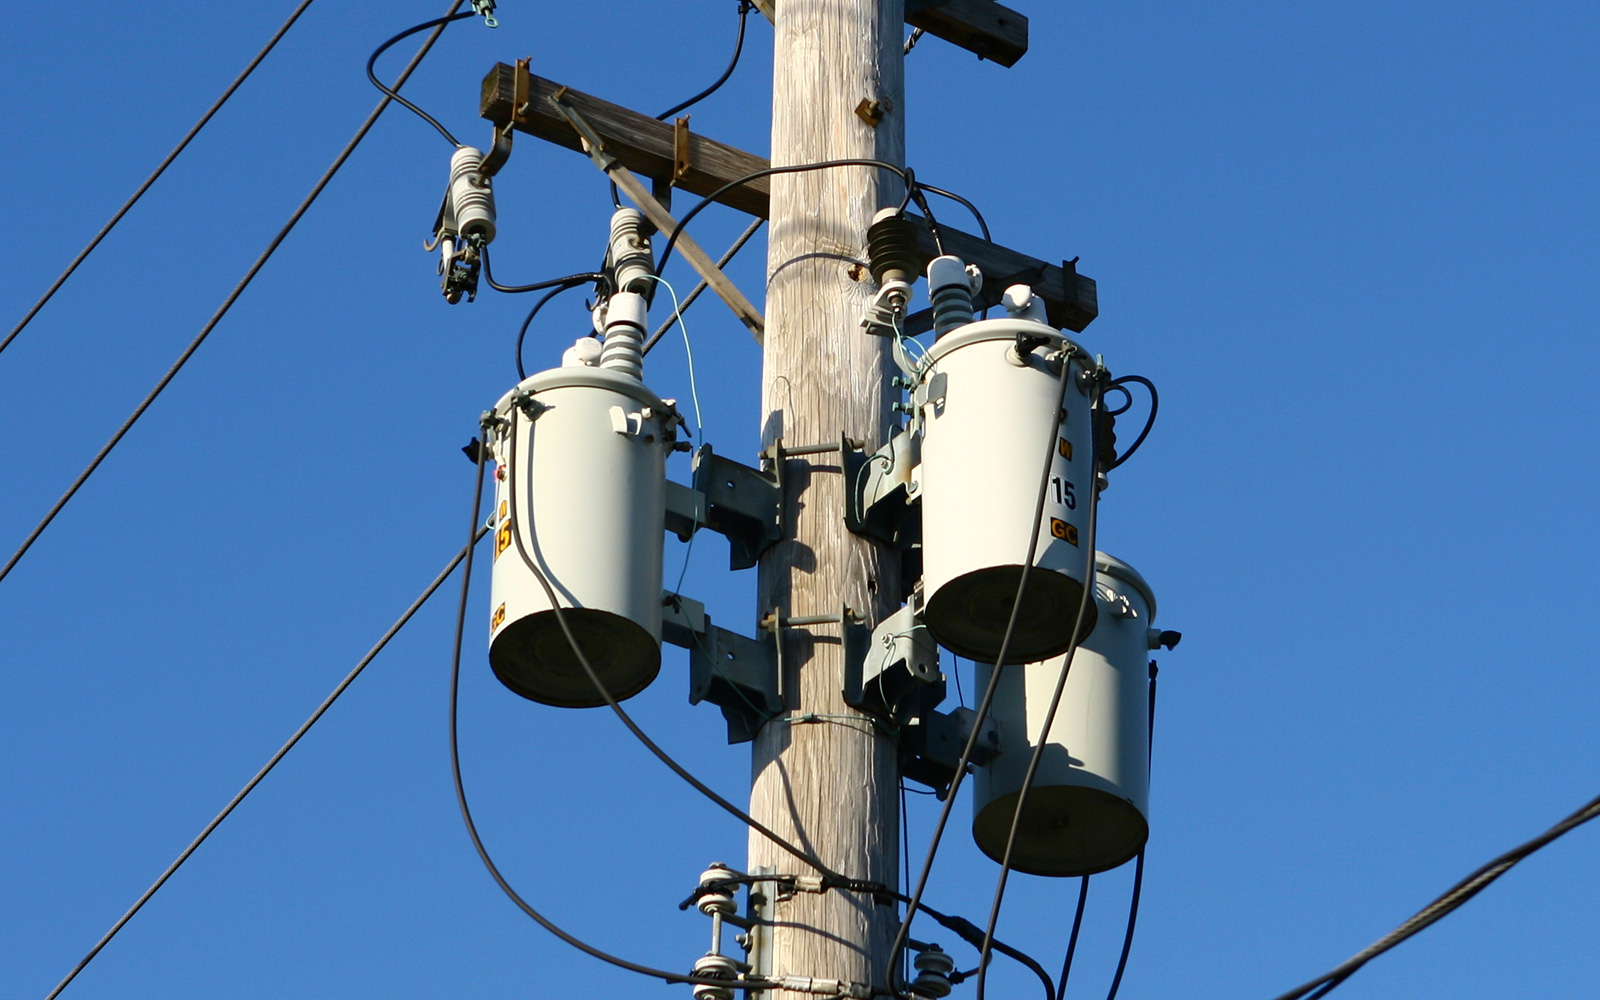 Three cylindrical power transformers suspended atop a utility pole